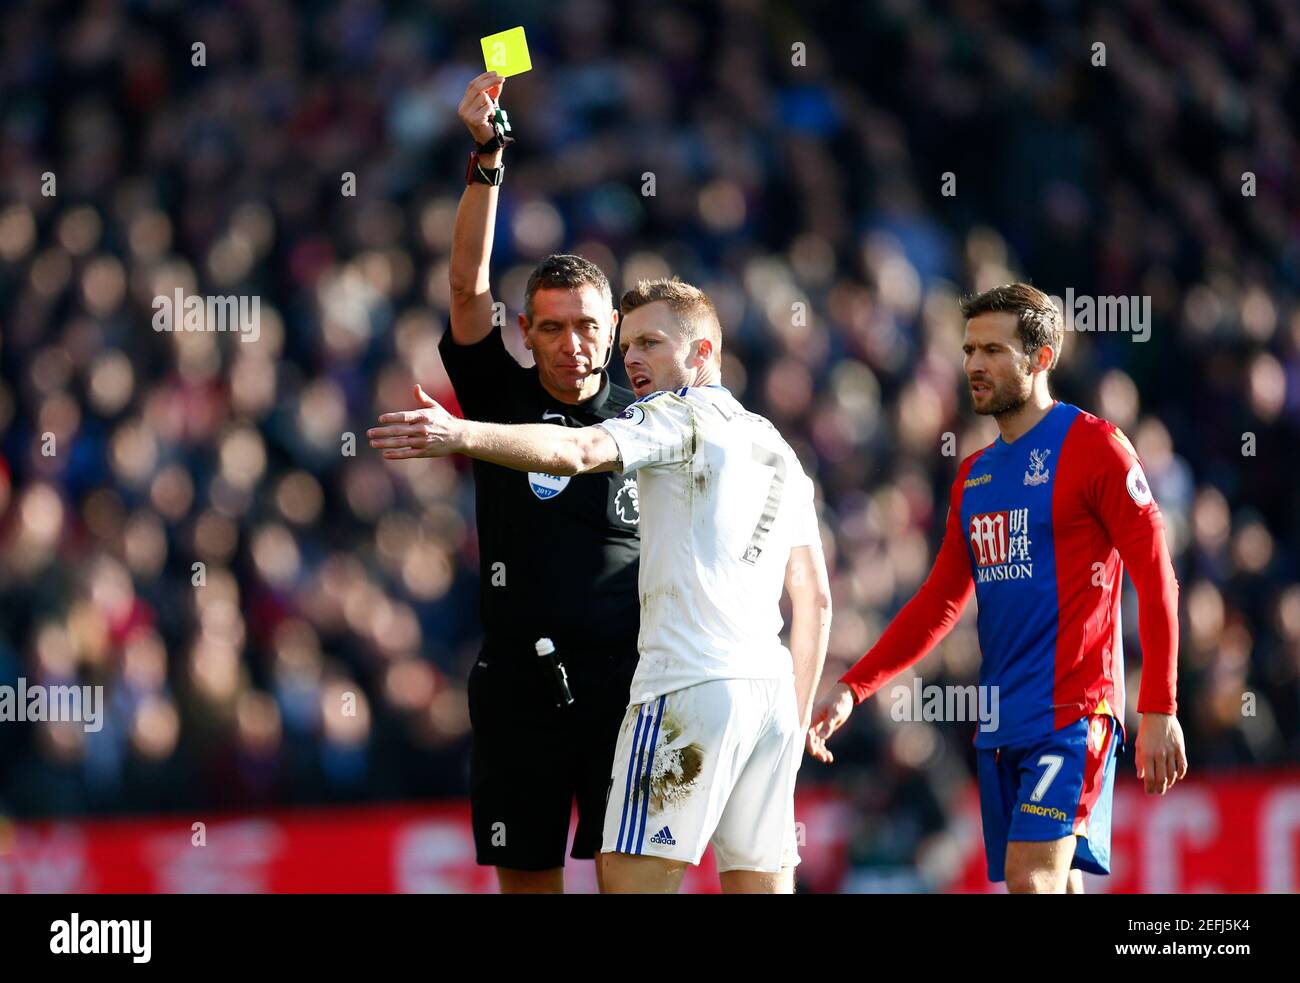 Britain Football Soccer - Crystal Palace v Sunderland - Premier League - Selhurst Park - 4/2/17 Sunderland's Sebastian Larsson is shown a yellow card by referee Andre Marriner Reuters / Andrew Winning Livepic EDITORIAL USE ONLY. No use with unauthorized audio, video, data, fixture lists, club/league logos or 'live' services. Online in-match use limited to 45 images, no video emulation. No use in betting, games or single club/league/player publications.  Please contact your account representative for further details. Stock Photo